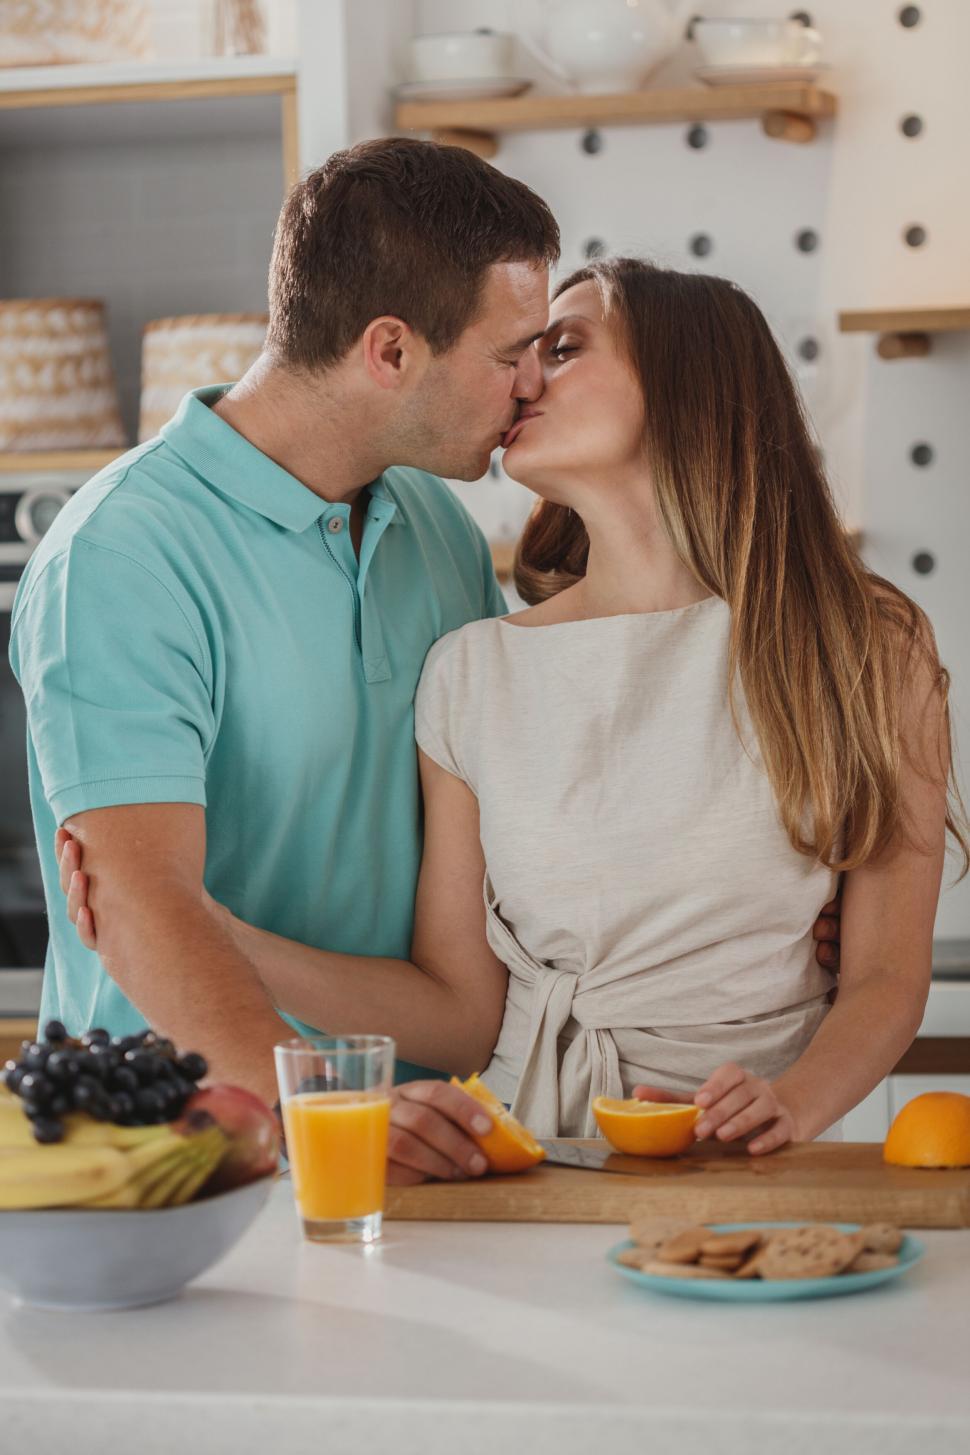 Free Image of Couple embracing while preparing breakfast 